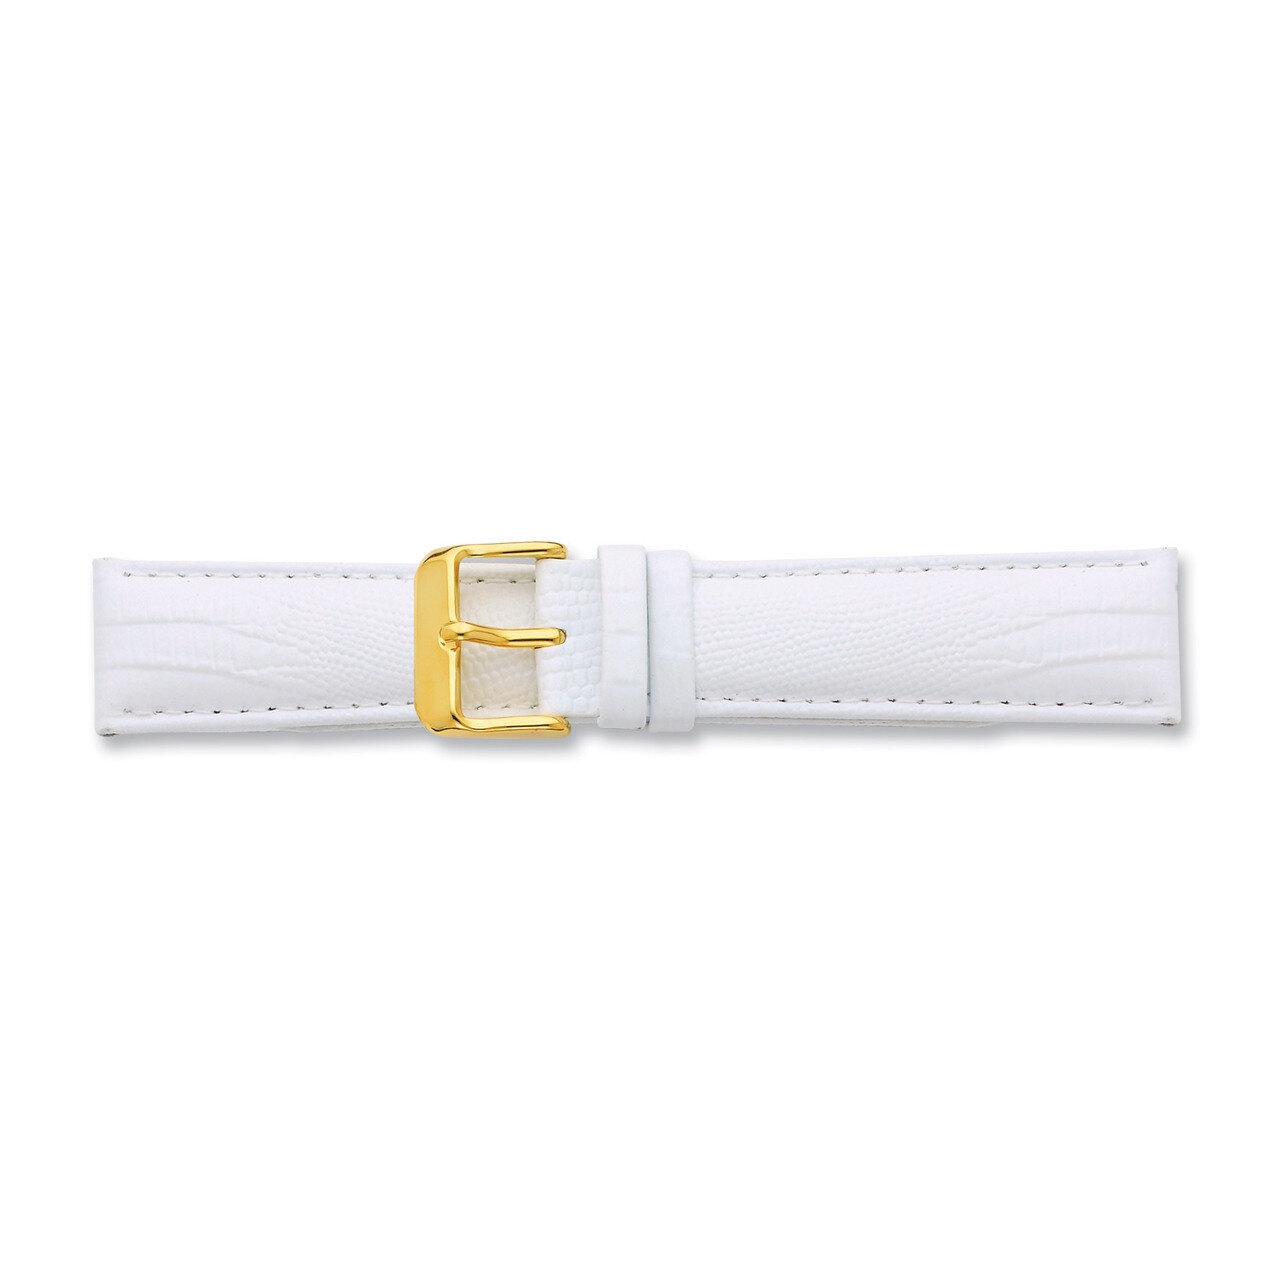 19mm White Teju Lizzard Grain Leather Buckle Watch Band 7.5 Inch Gold-tone BA203-19